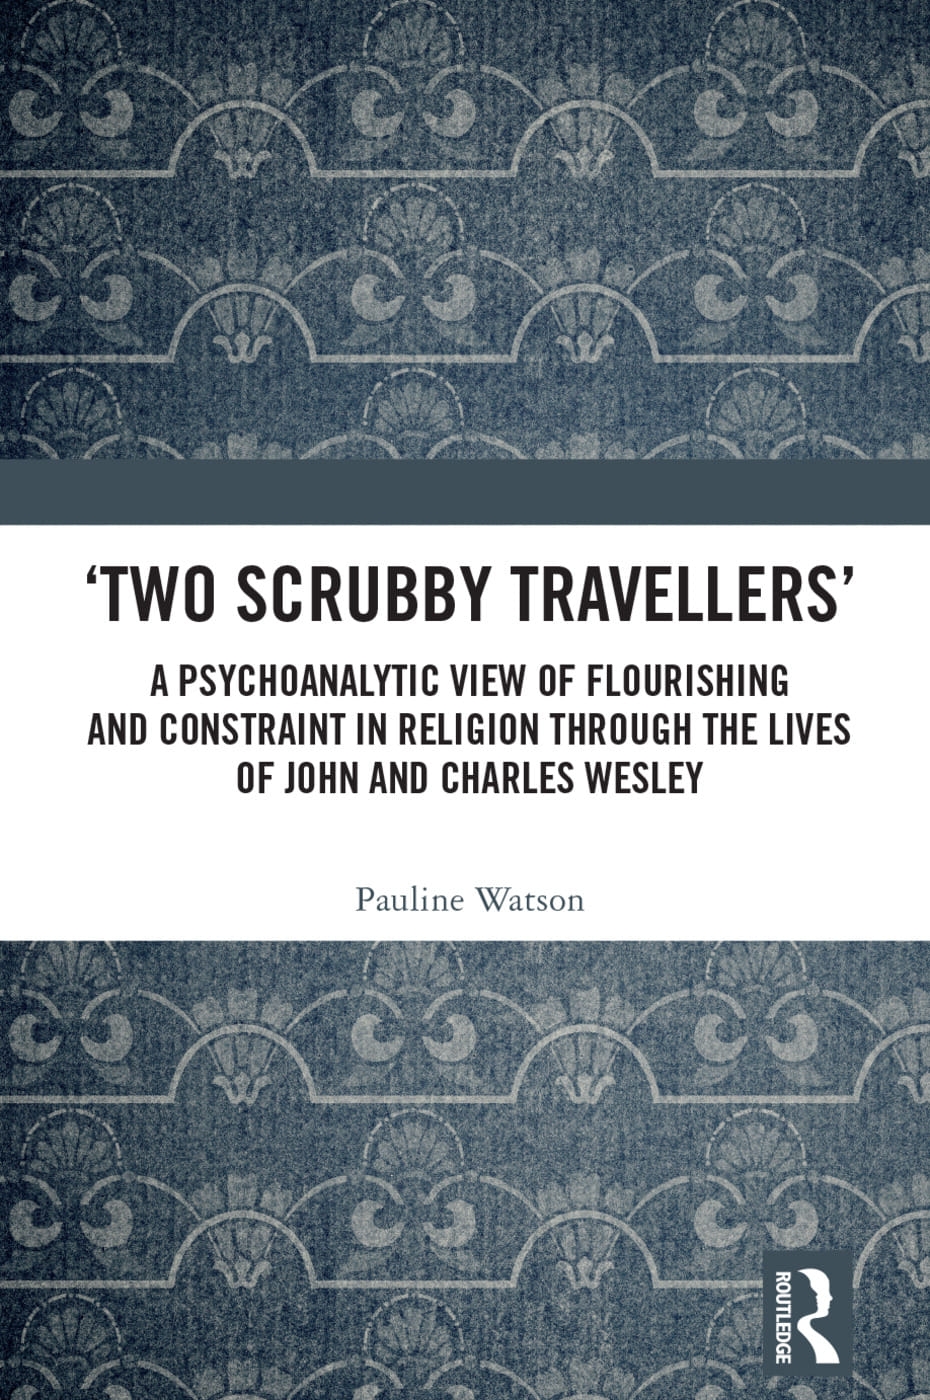 Two Scrubby Travellers: A Psychoanalytic View of Flourishing and Constraint in Religion Through the Lives of John and Charles We